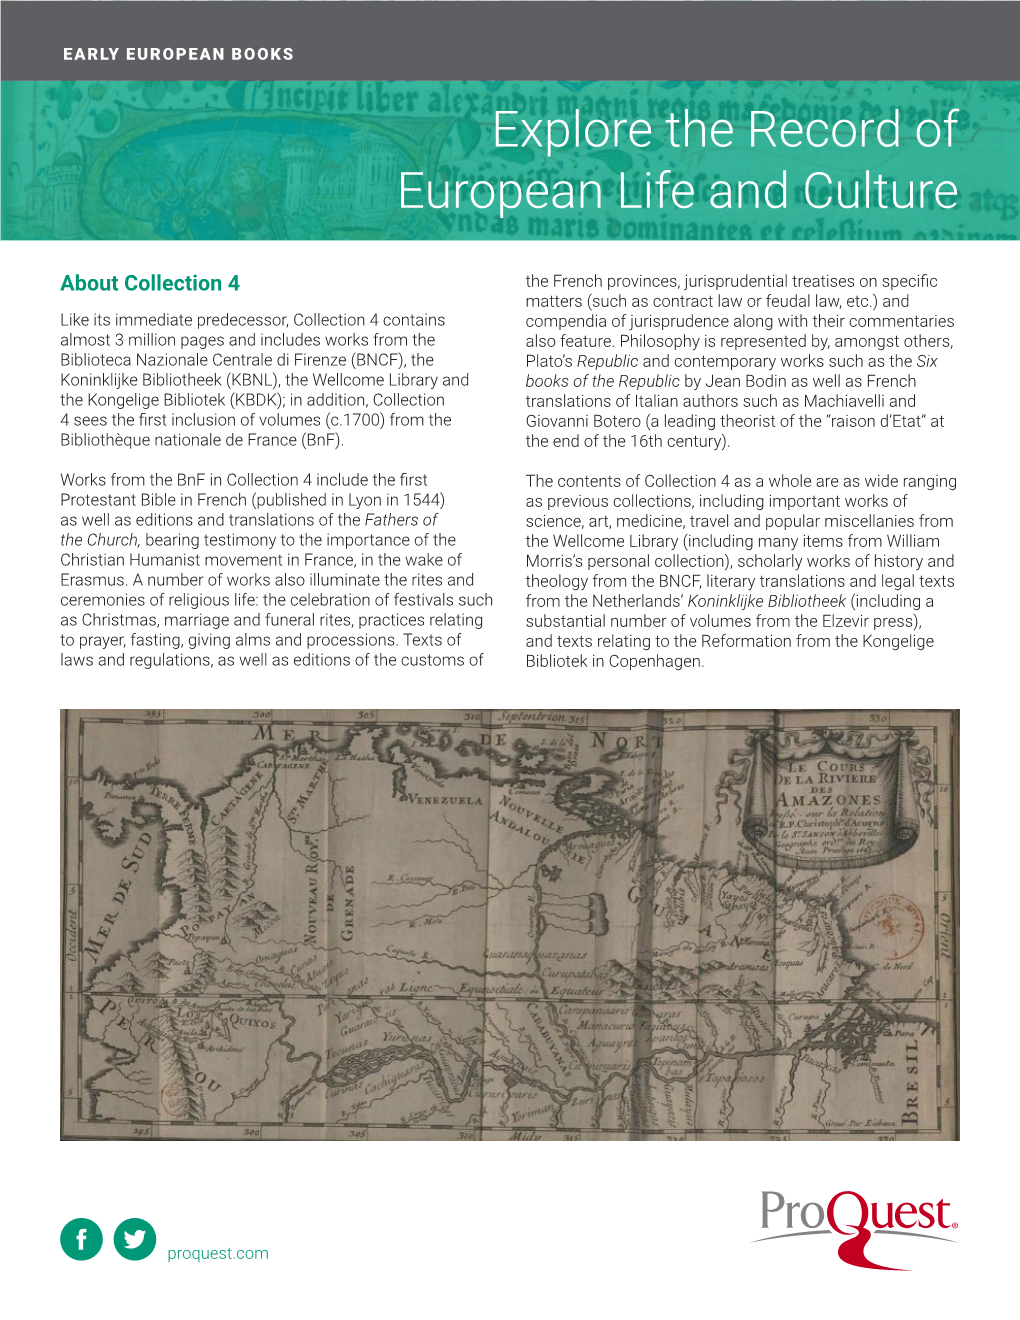 Explore the Record of European Life and Culture